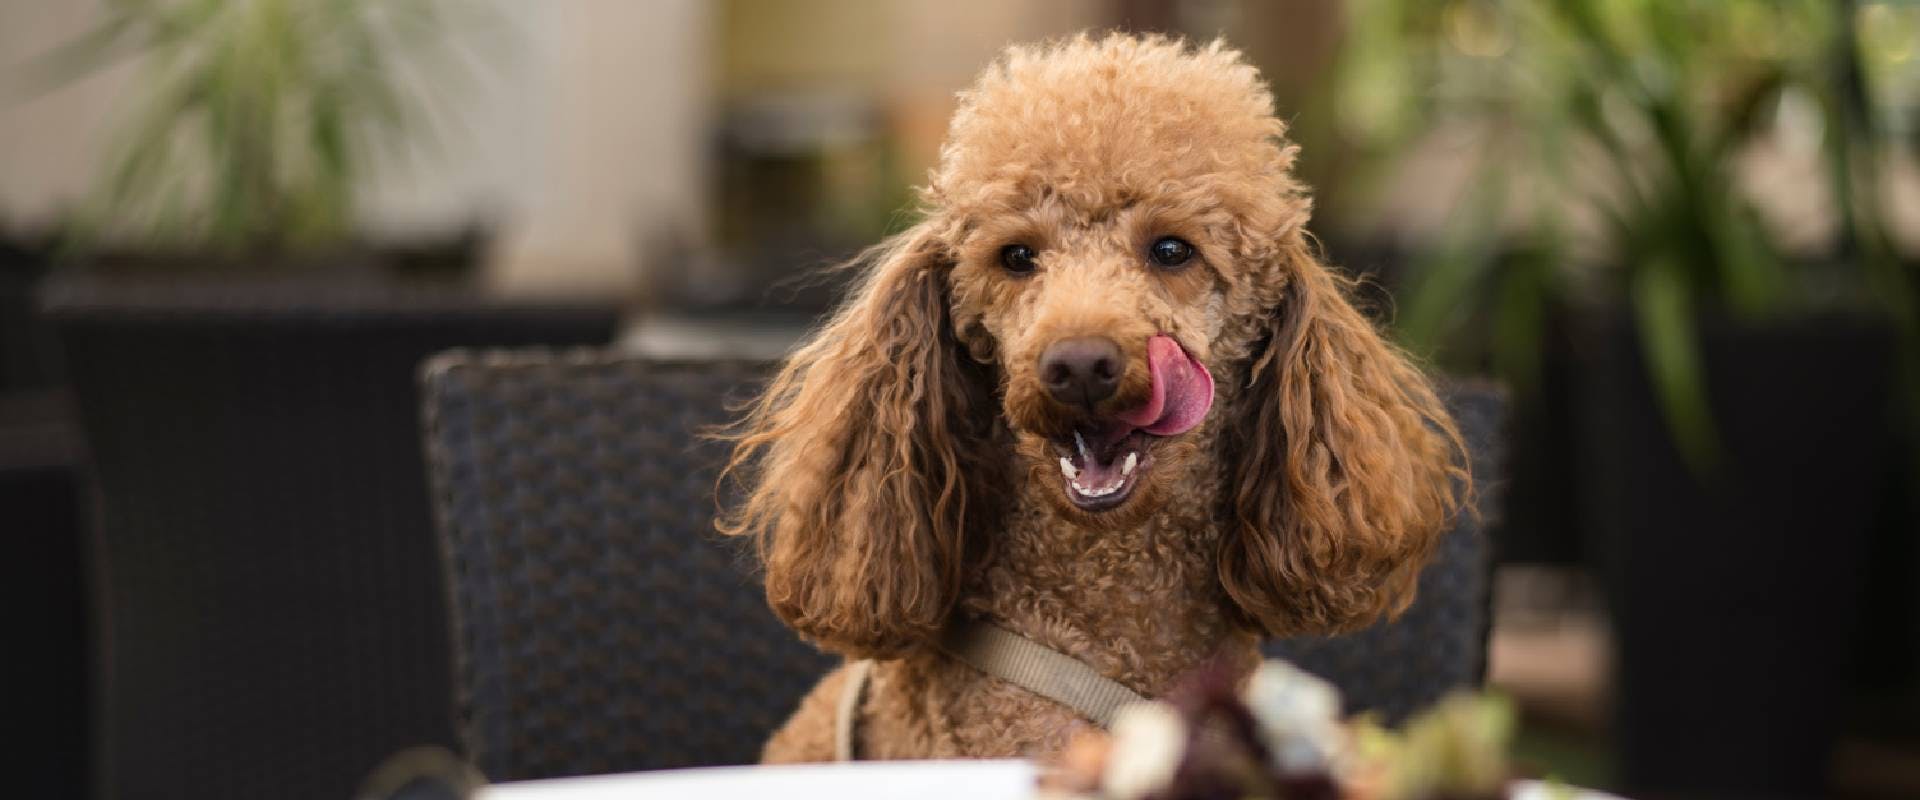 Poodle sitting at a table